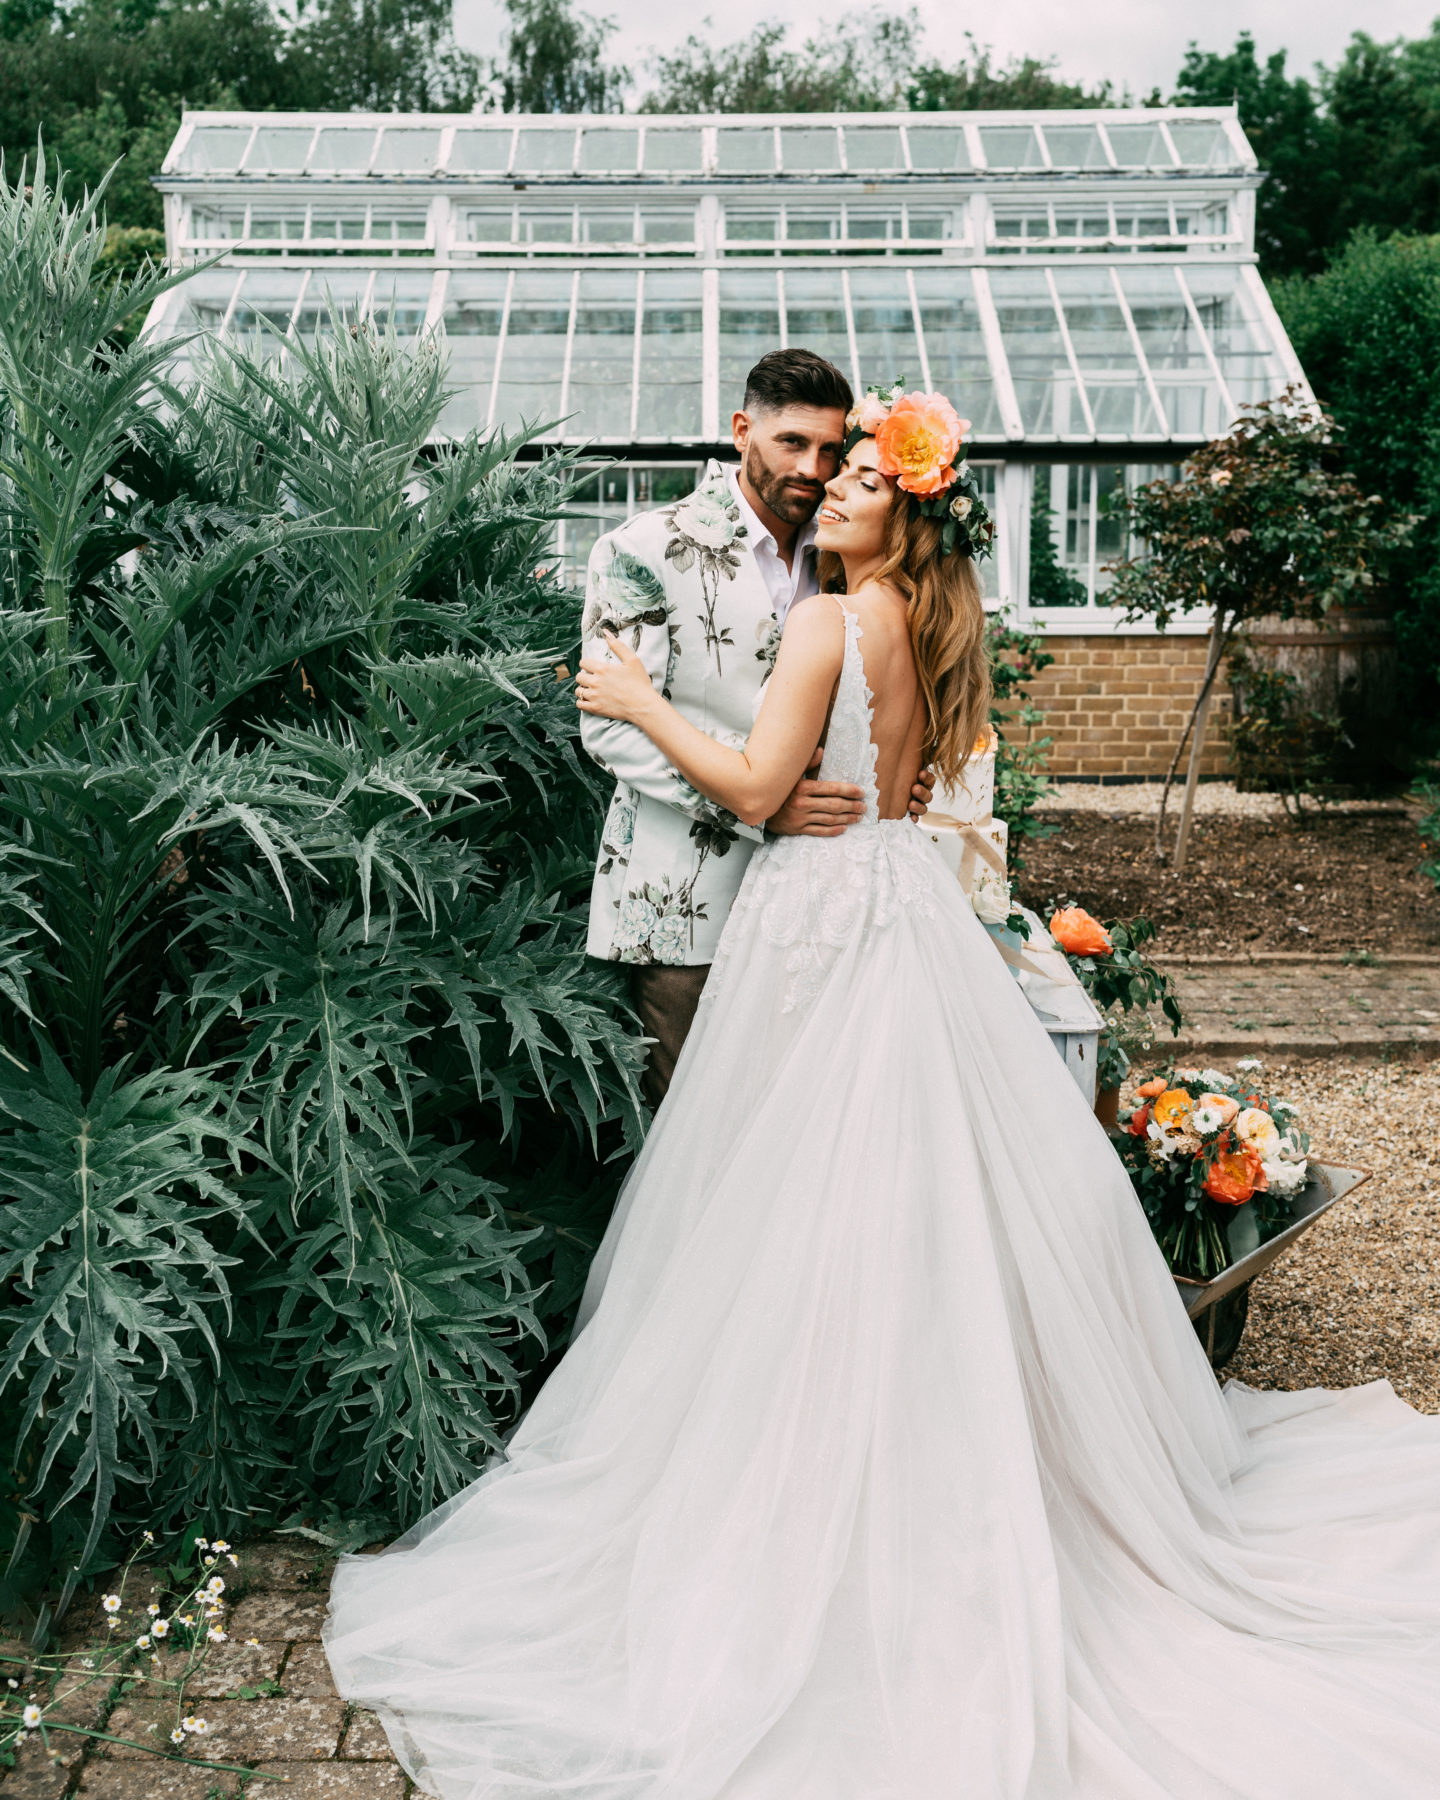 Floral Inspired Country Garden Wedding At The Gardens, Kent